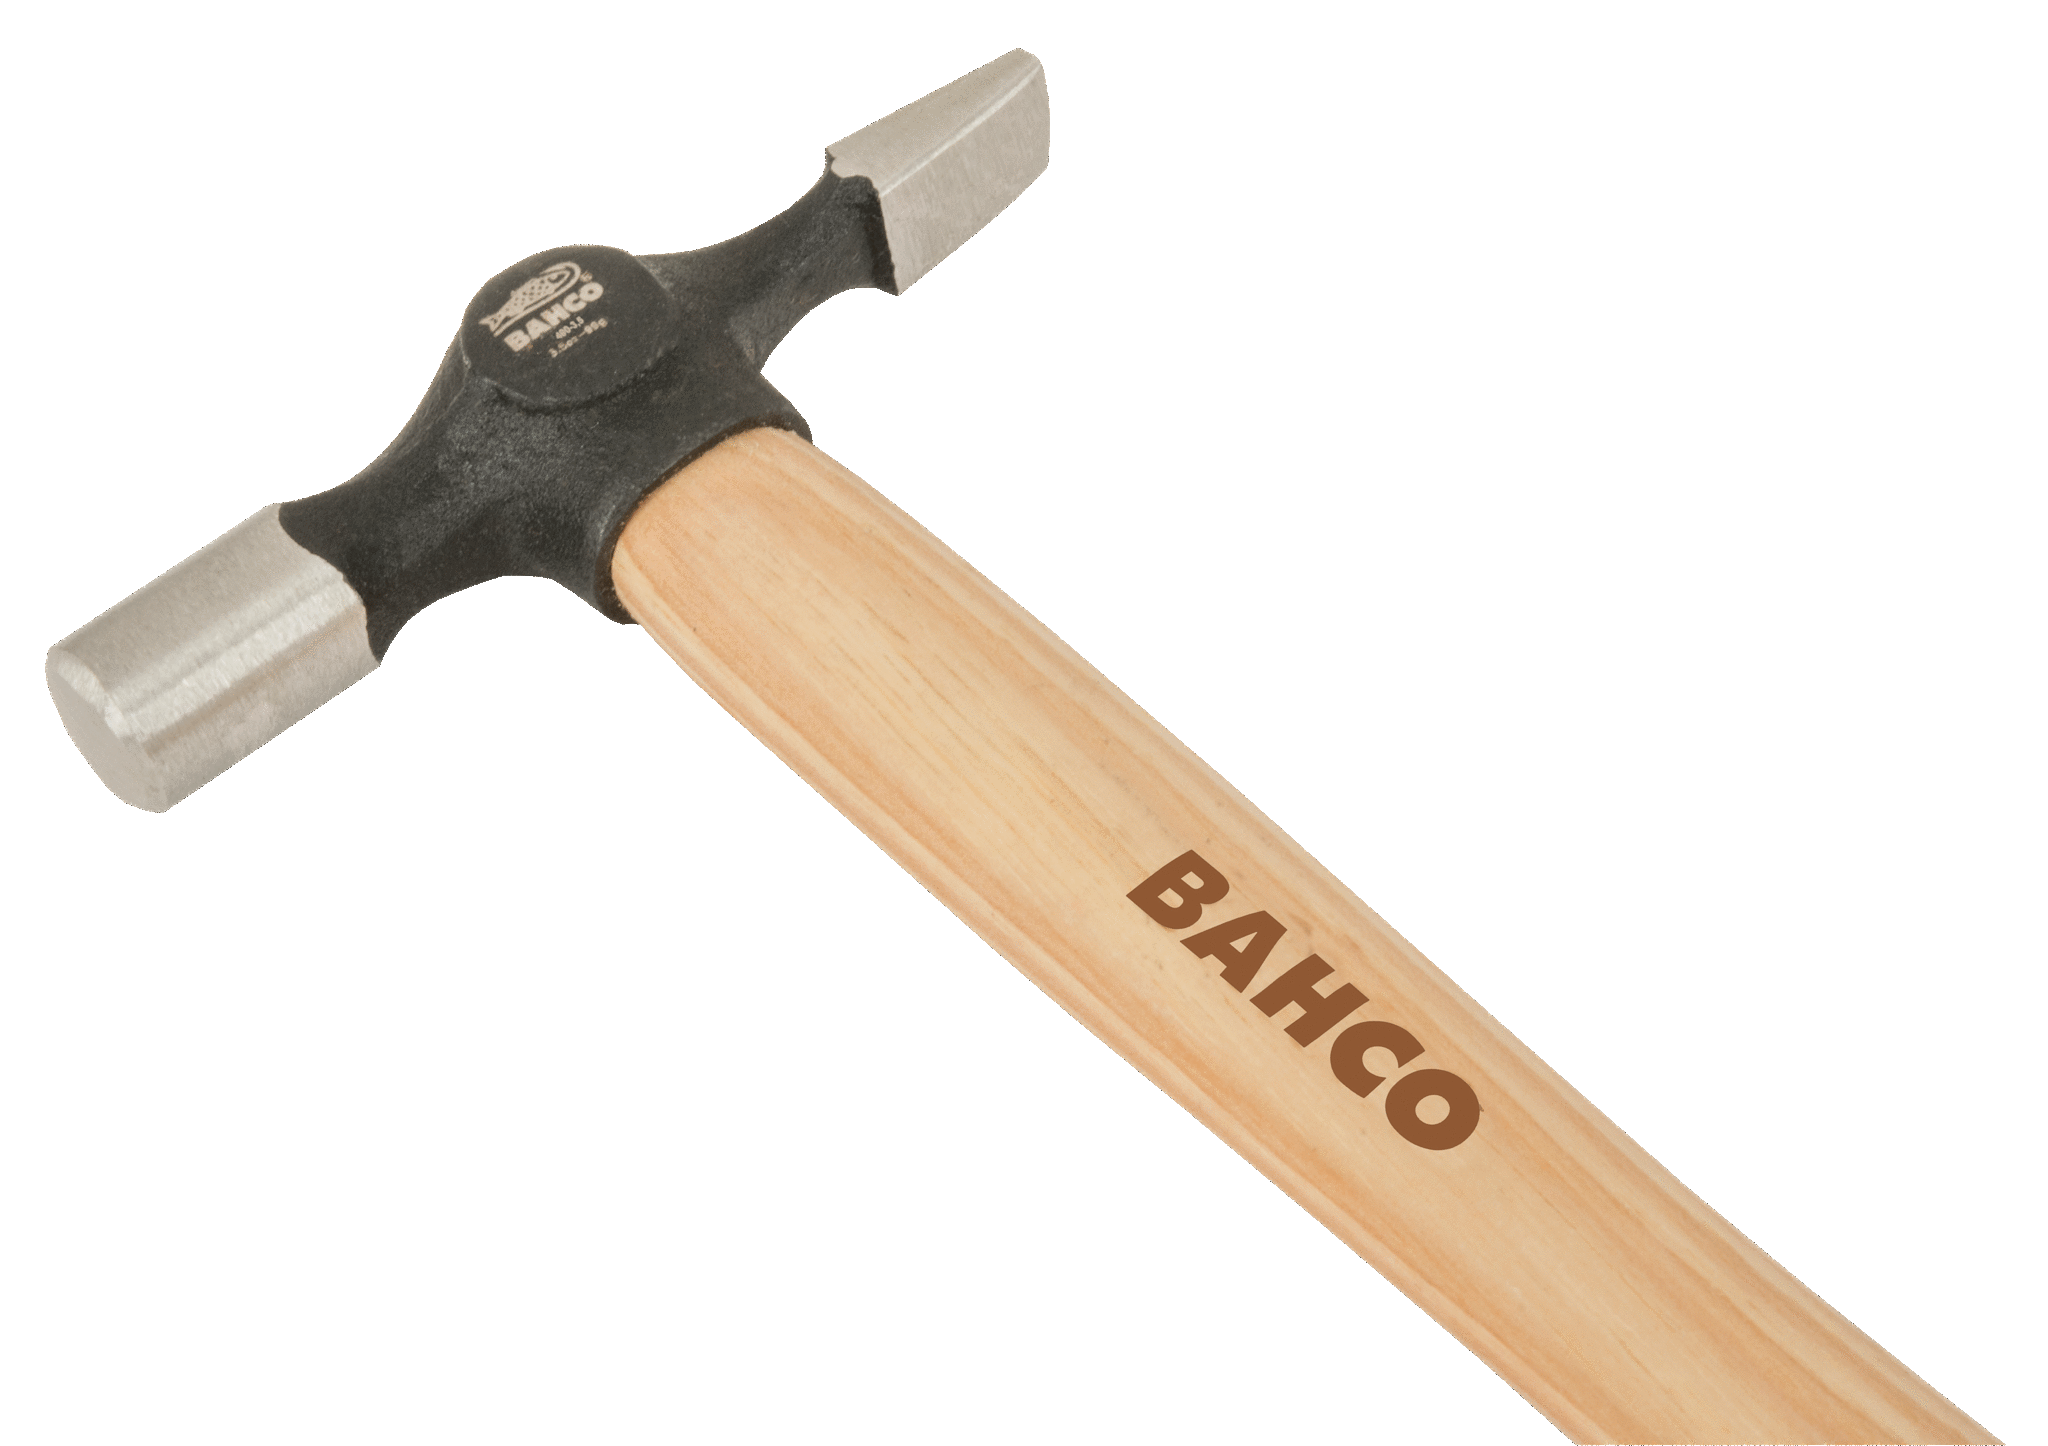 Cross Pein Pin Hammers with Hickory Handle - 490-3.5 by Bahco